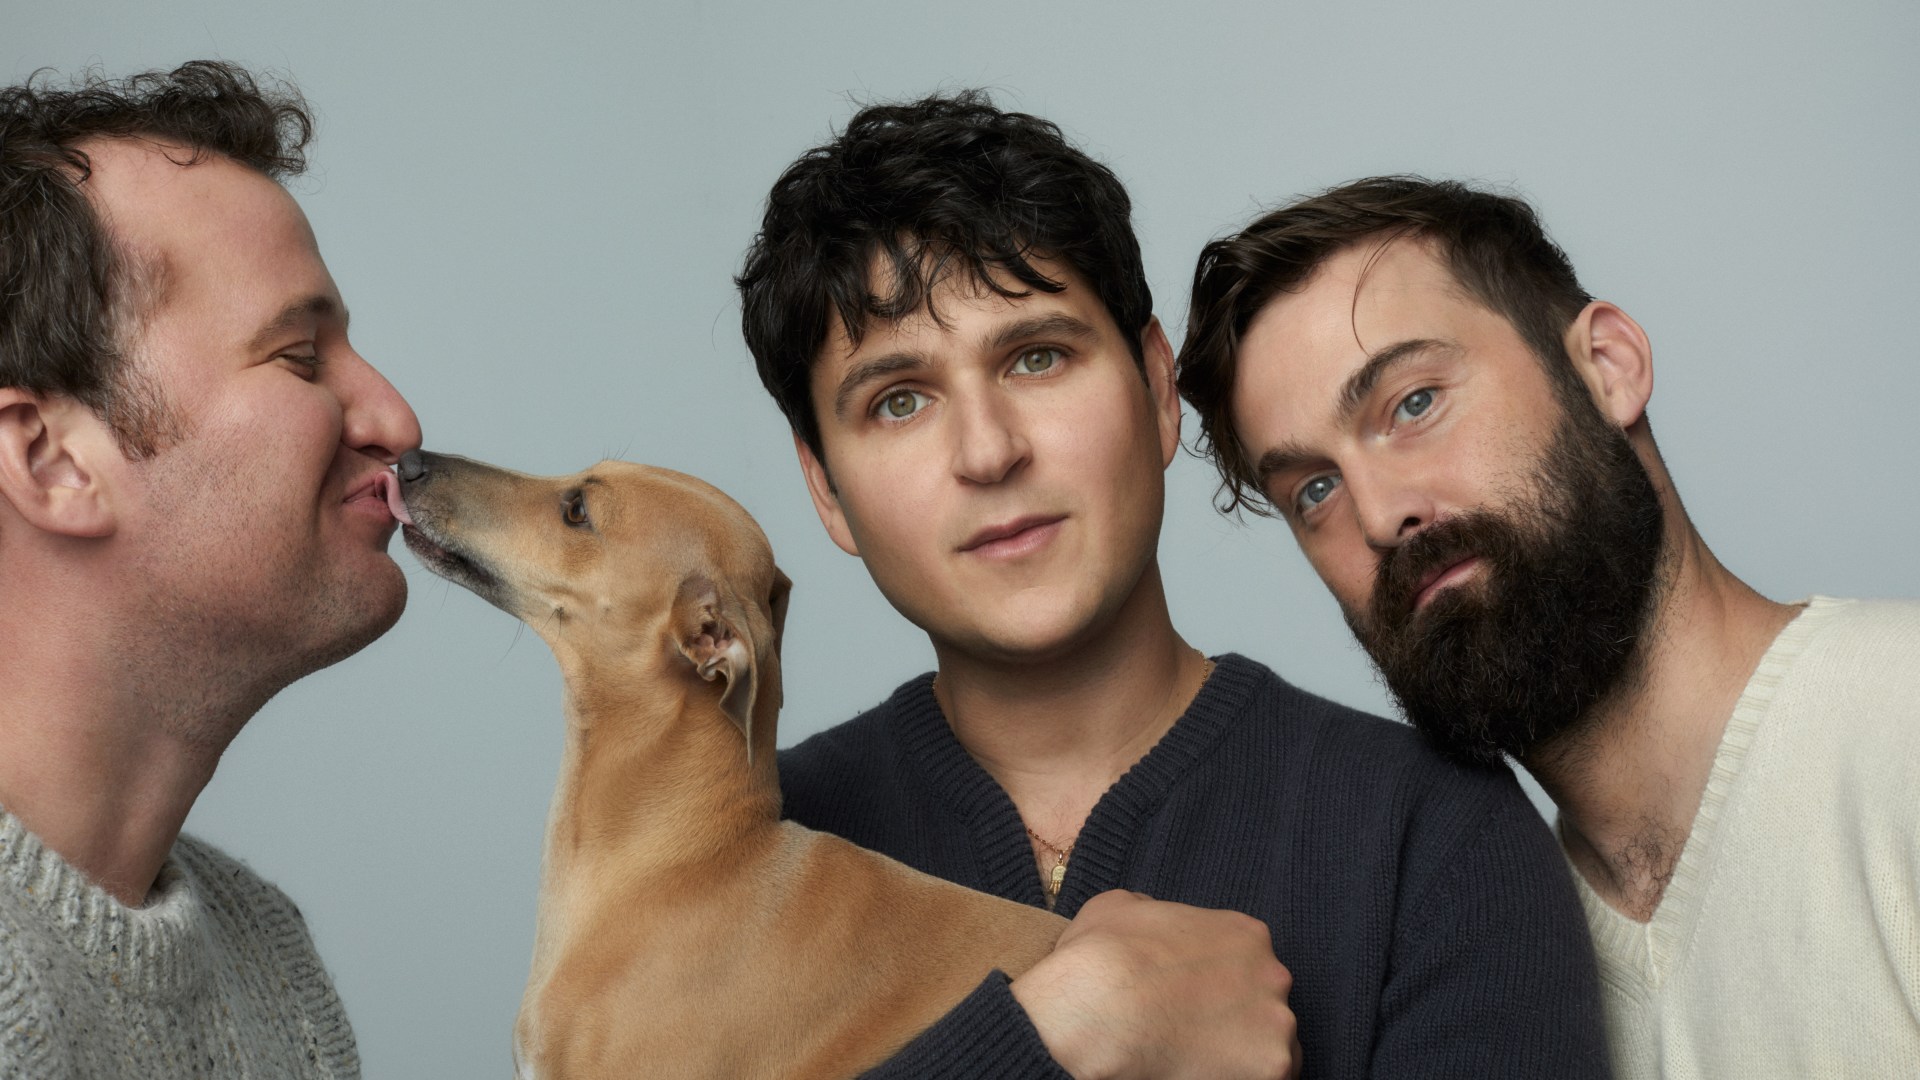 Ezra Koenig Invites You to Break the Rules and Go Wild with Vampire Weekend on UK Tour – Let’s Get Out There Together!